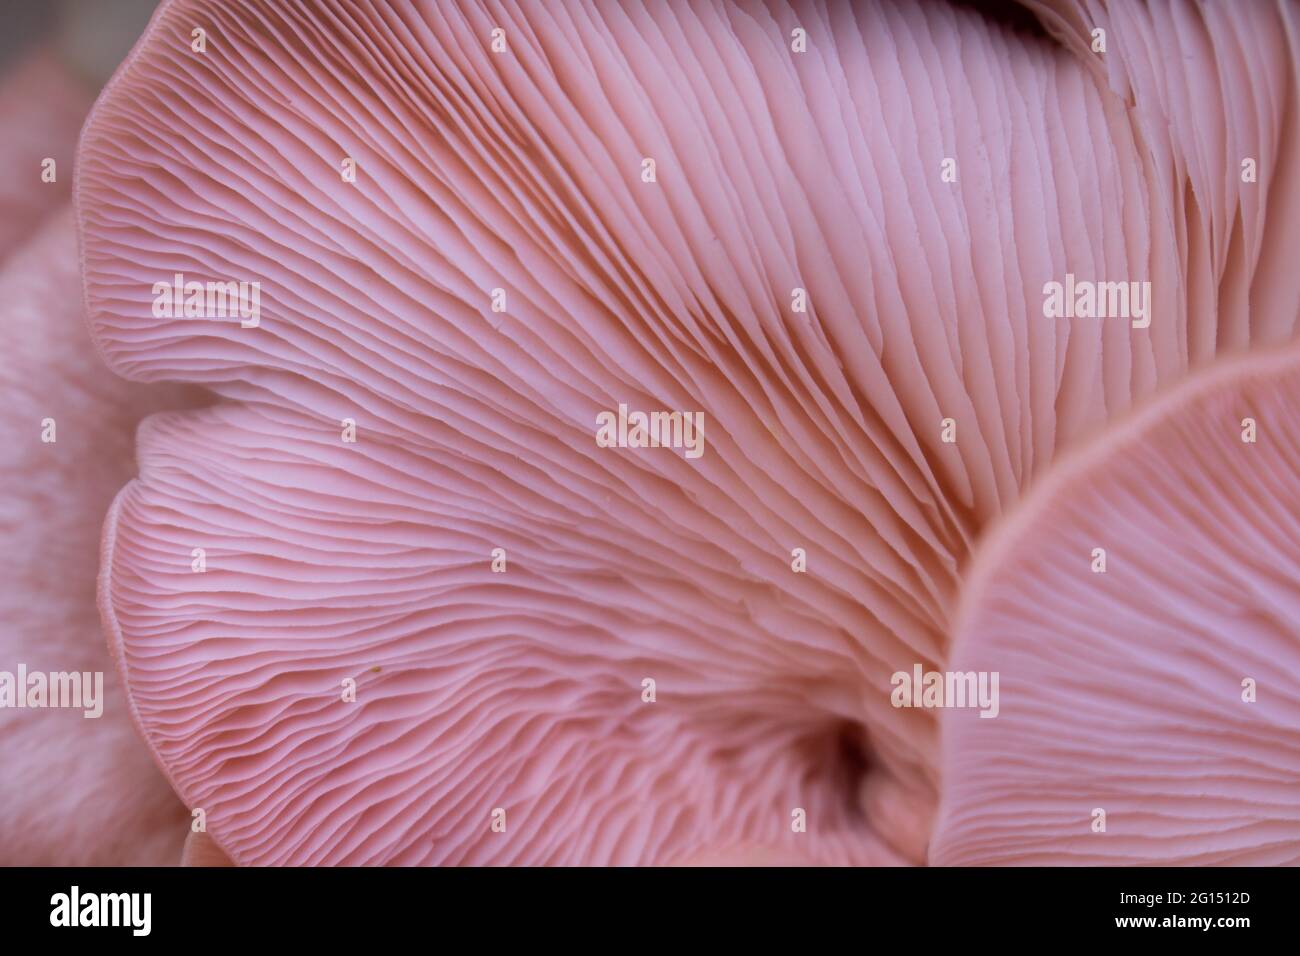 Close-up of the soft meaty texture of a pleurotus djamor or pink oyster mushroom. Detail of gills. Culinary or fungi culture abstract background Stock Photo